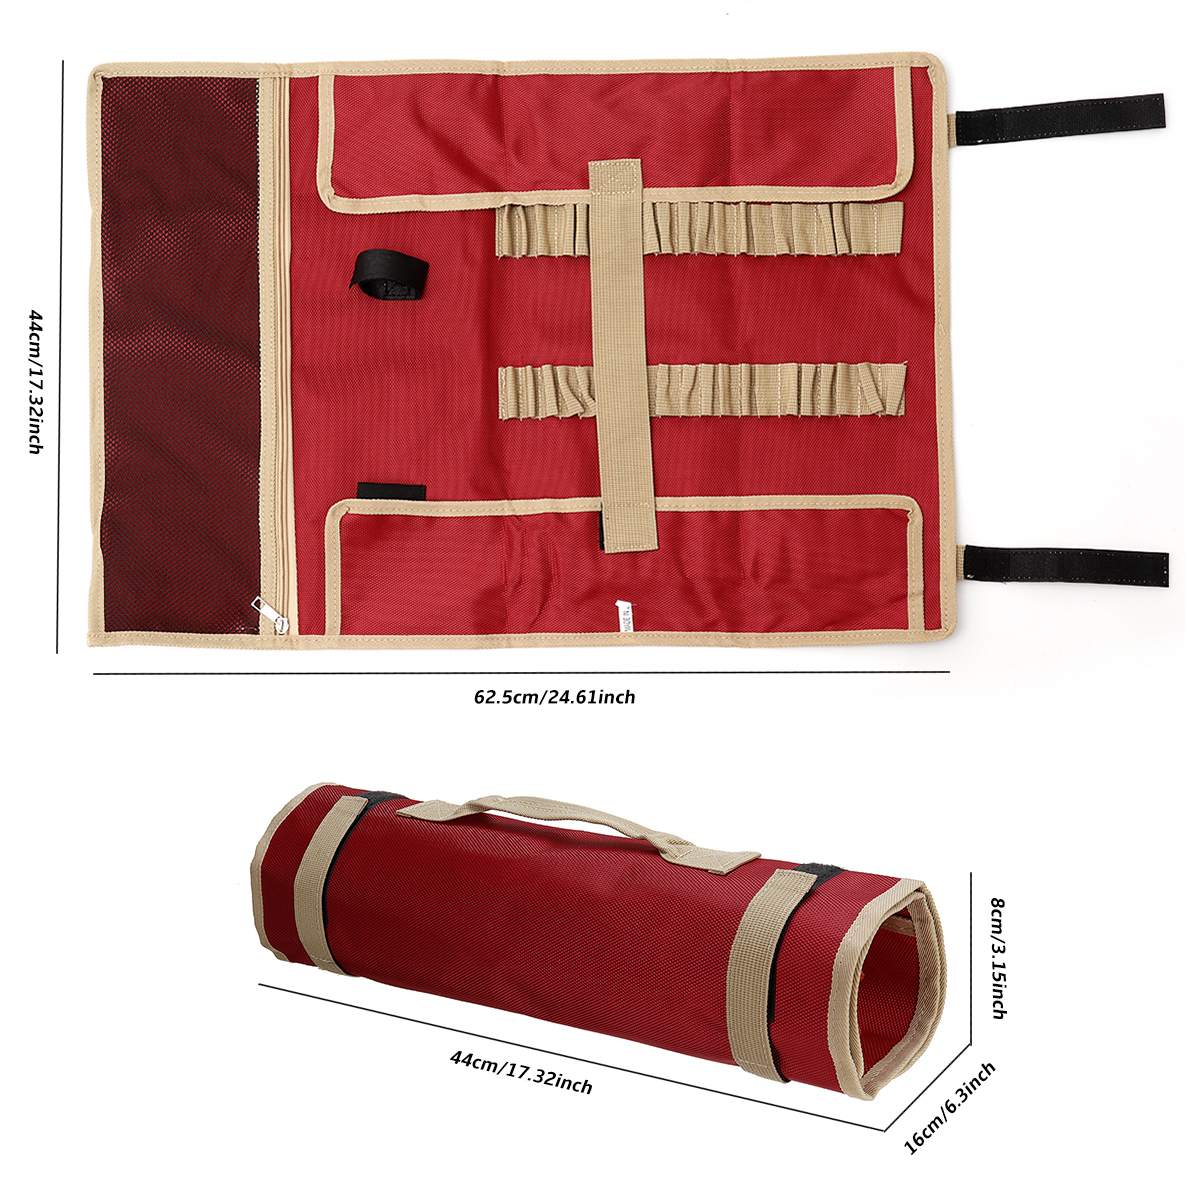 Red-Portable-Outdoor-Camping-Nail-Work-Tool-Bag-Storage-Pocket-Poucch-Handbag-Tool-Bags-1750945-9